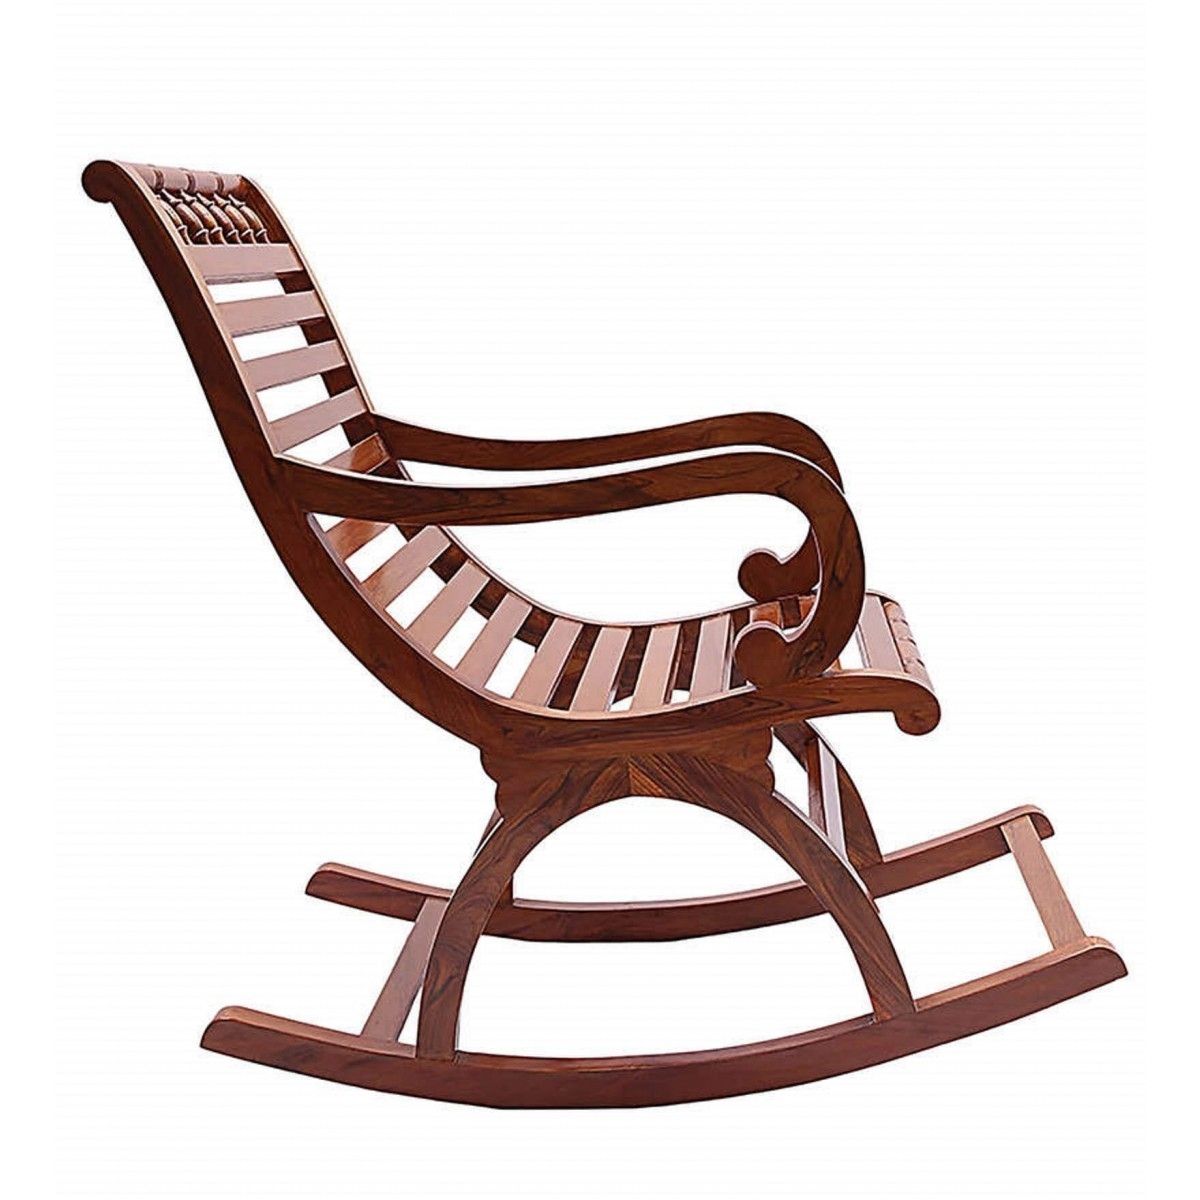 Rocking Chairs Online  Shop Wooden Rocking Chair At Here !! Throughout Well Known Helms Arm Chairs (View 19 of 20)